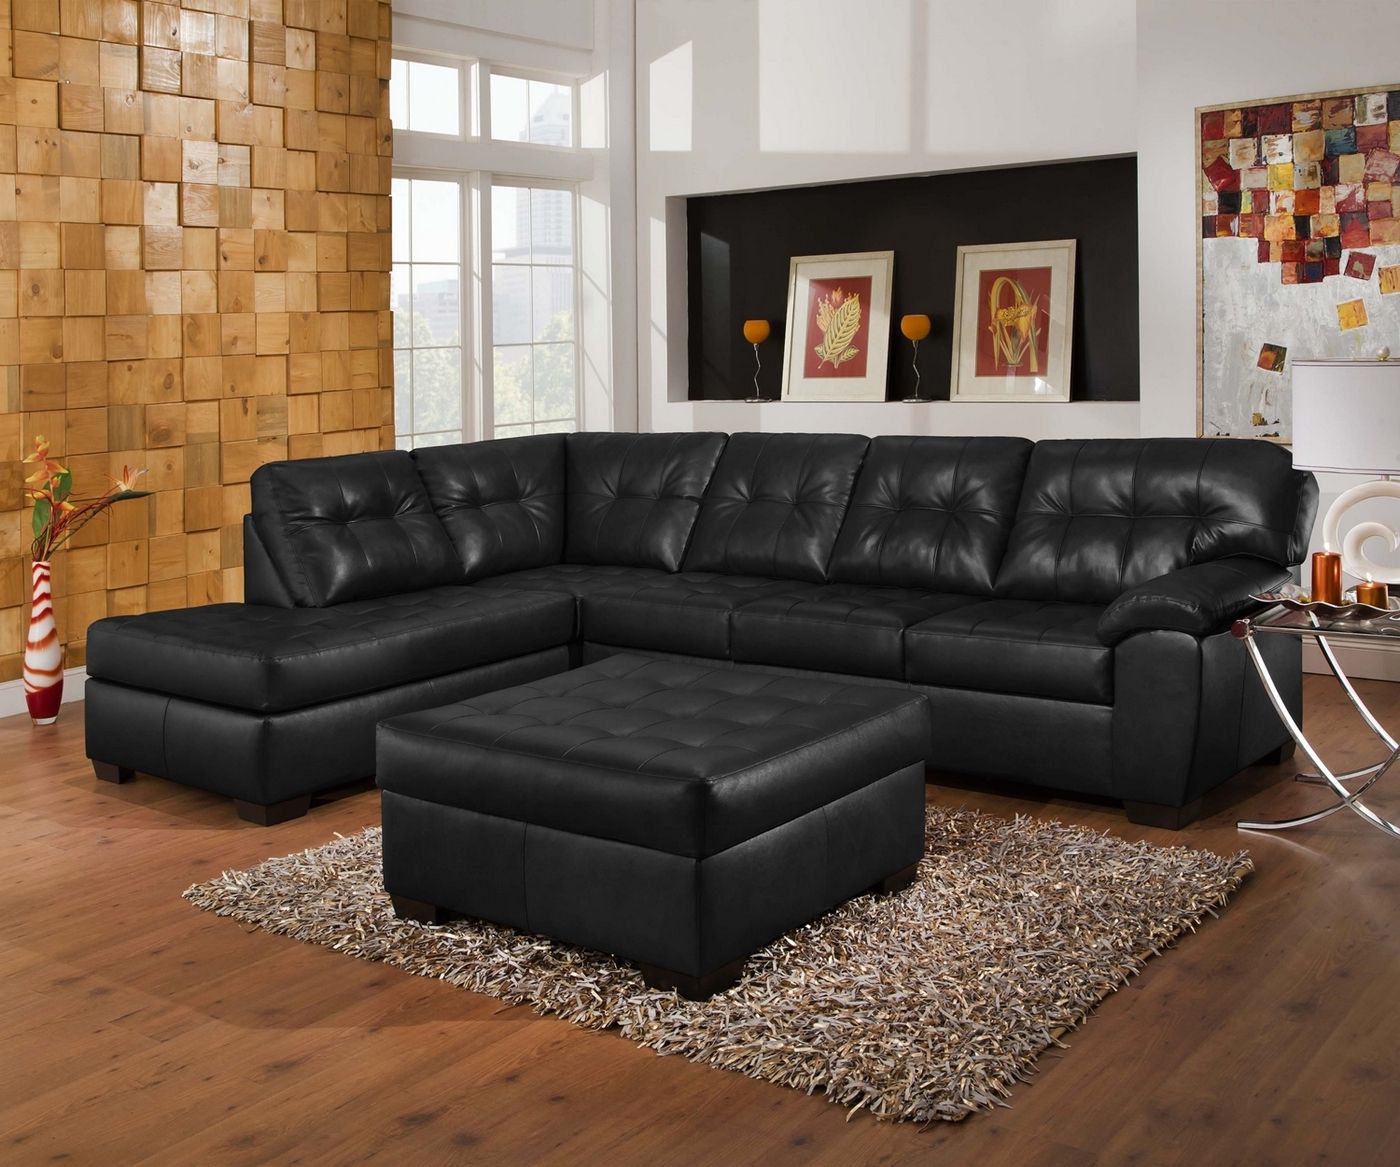 Soho Contemporary Onyx Leather Sectional Sofa W/ Left Chaise Intended For Sectional Sofas With Oversized Ottoman (View 10 of 15)